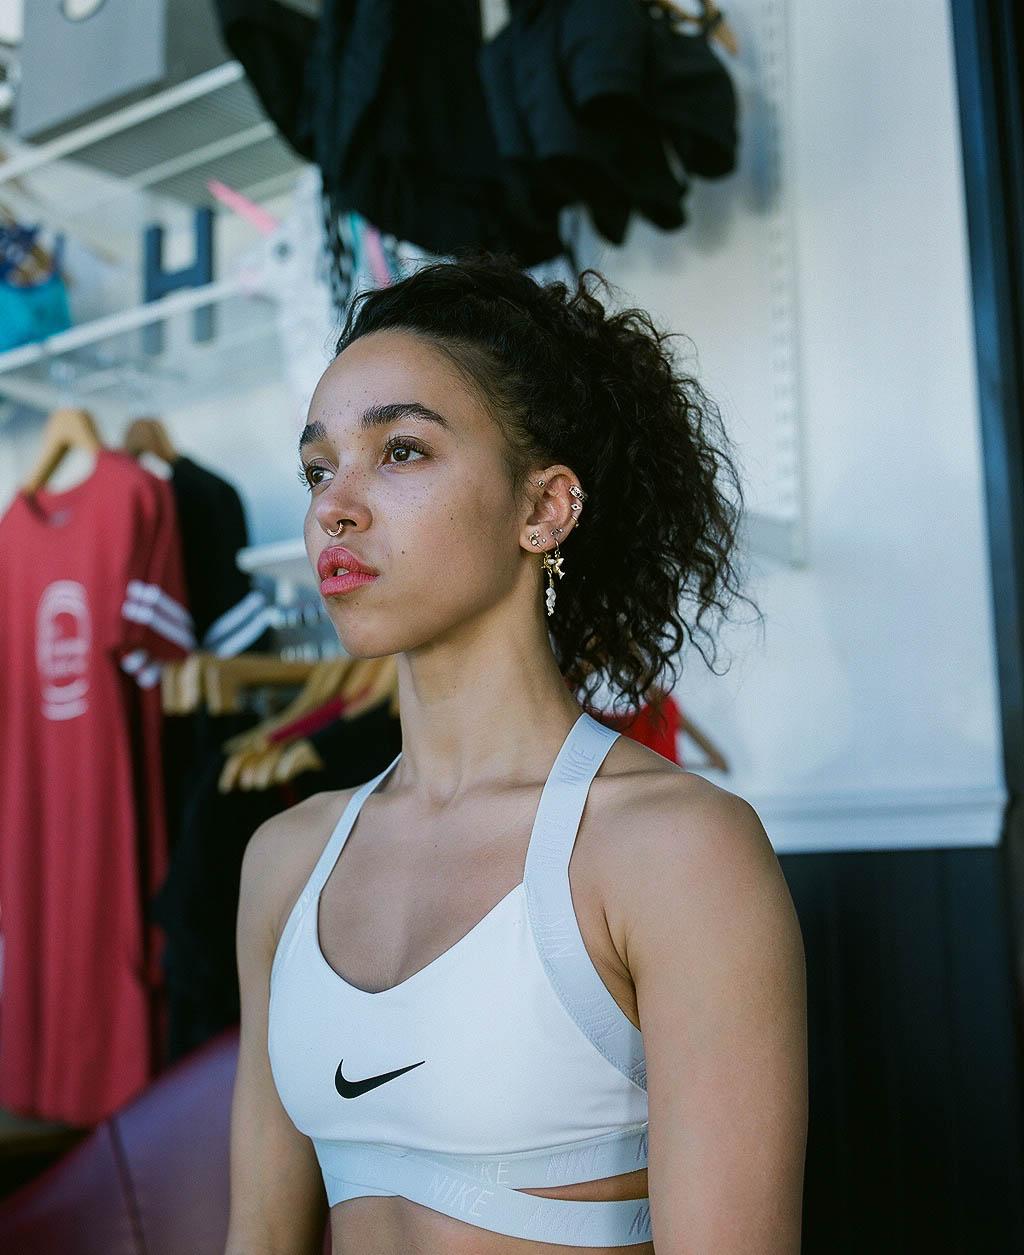 FKA twigs takes us behind the scenes of 'Cellophane'